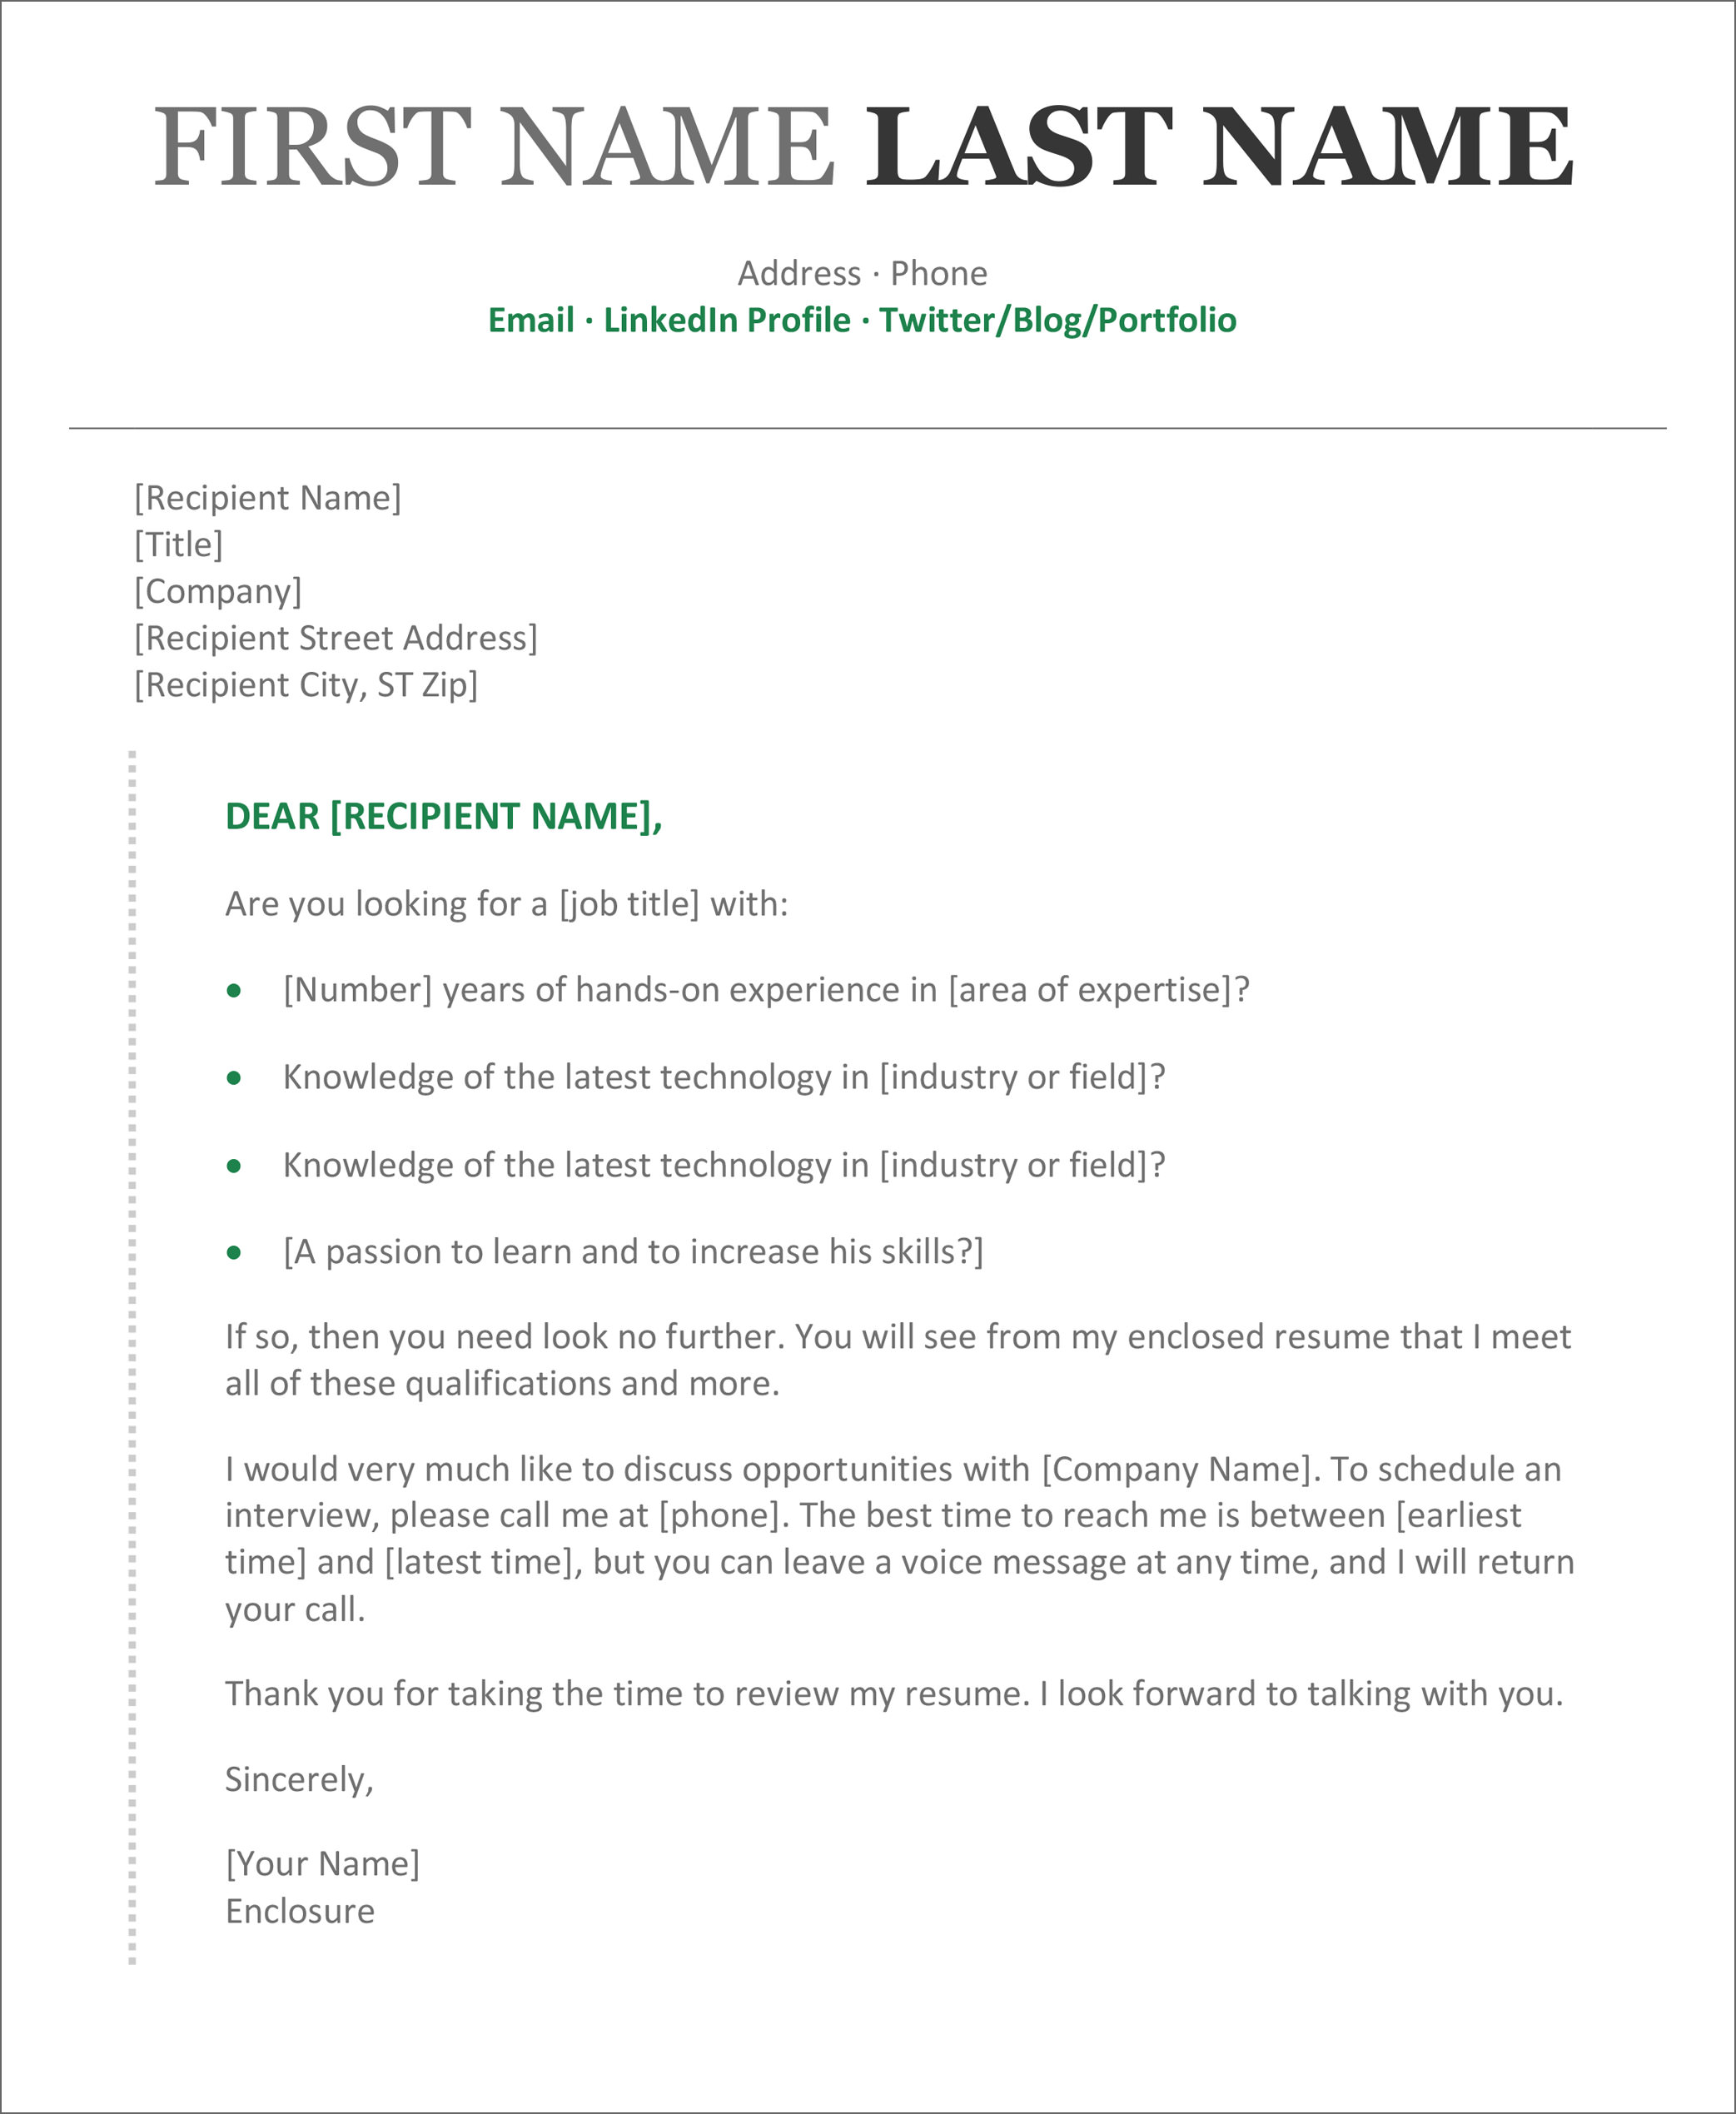 Cover Letter Word Template For Your Needs - Letter Template Collection